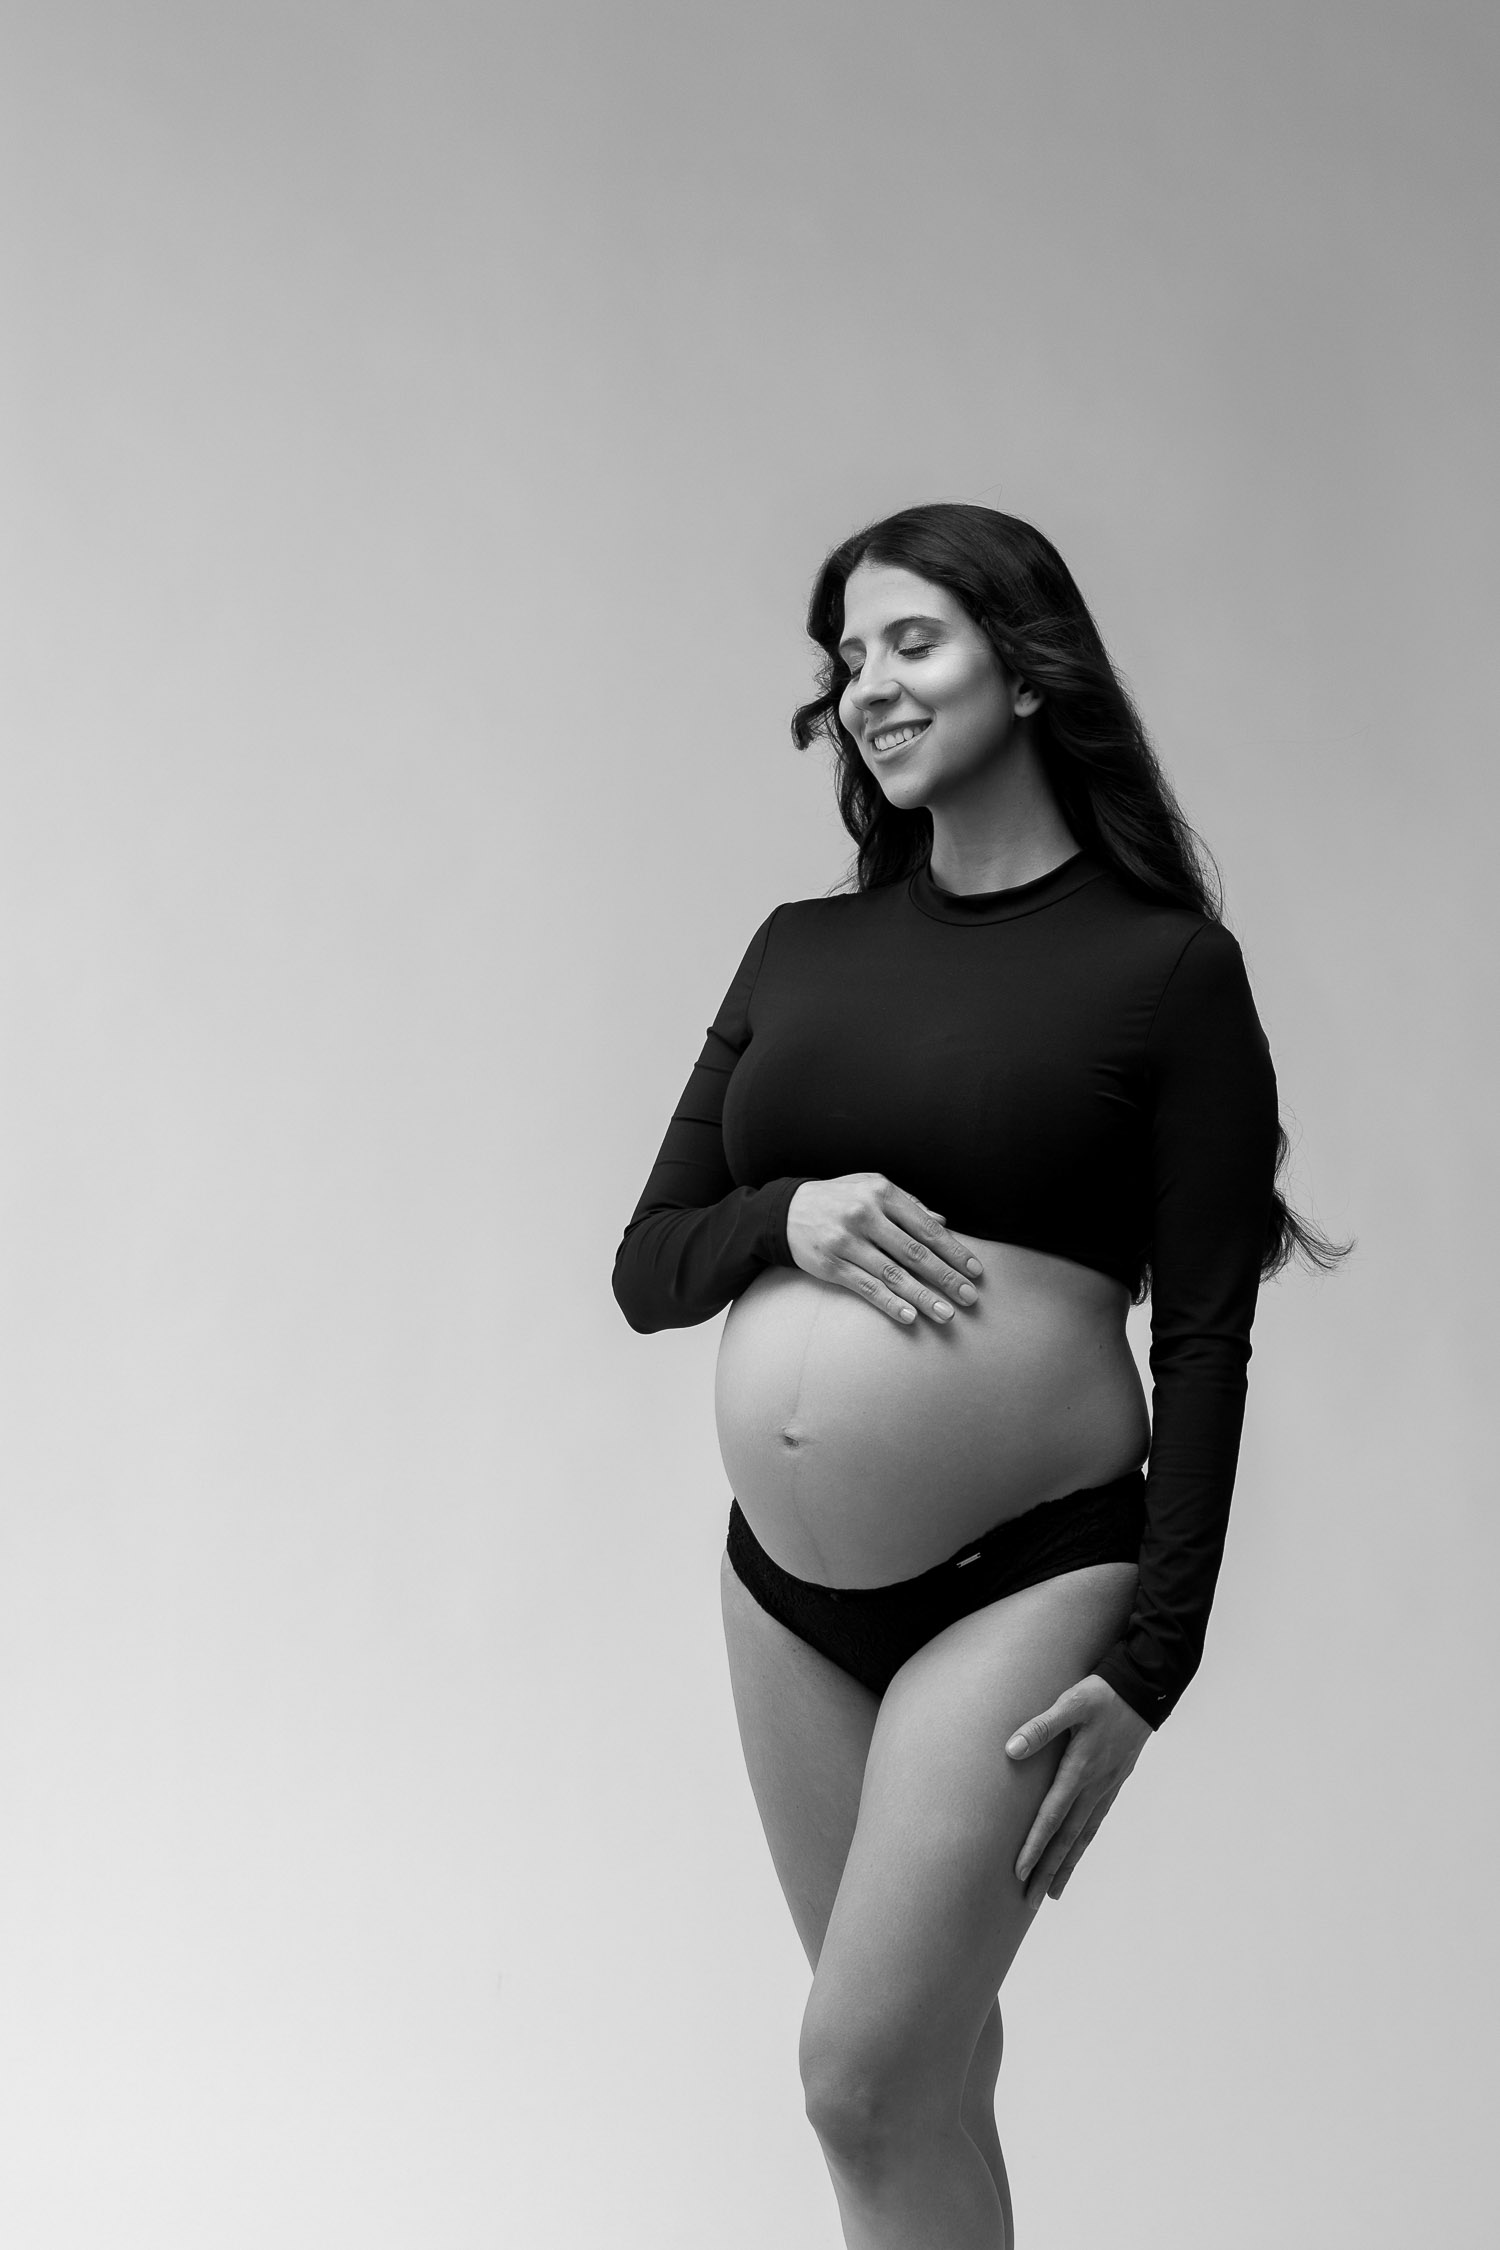 Pregnant photography